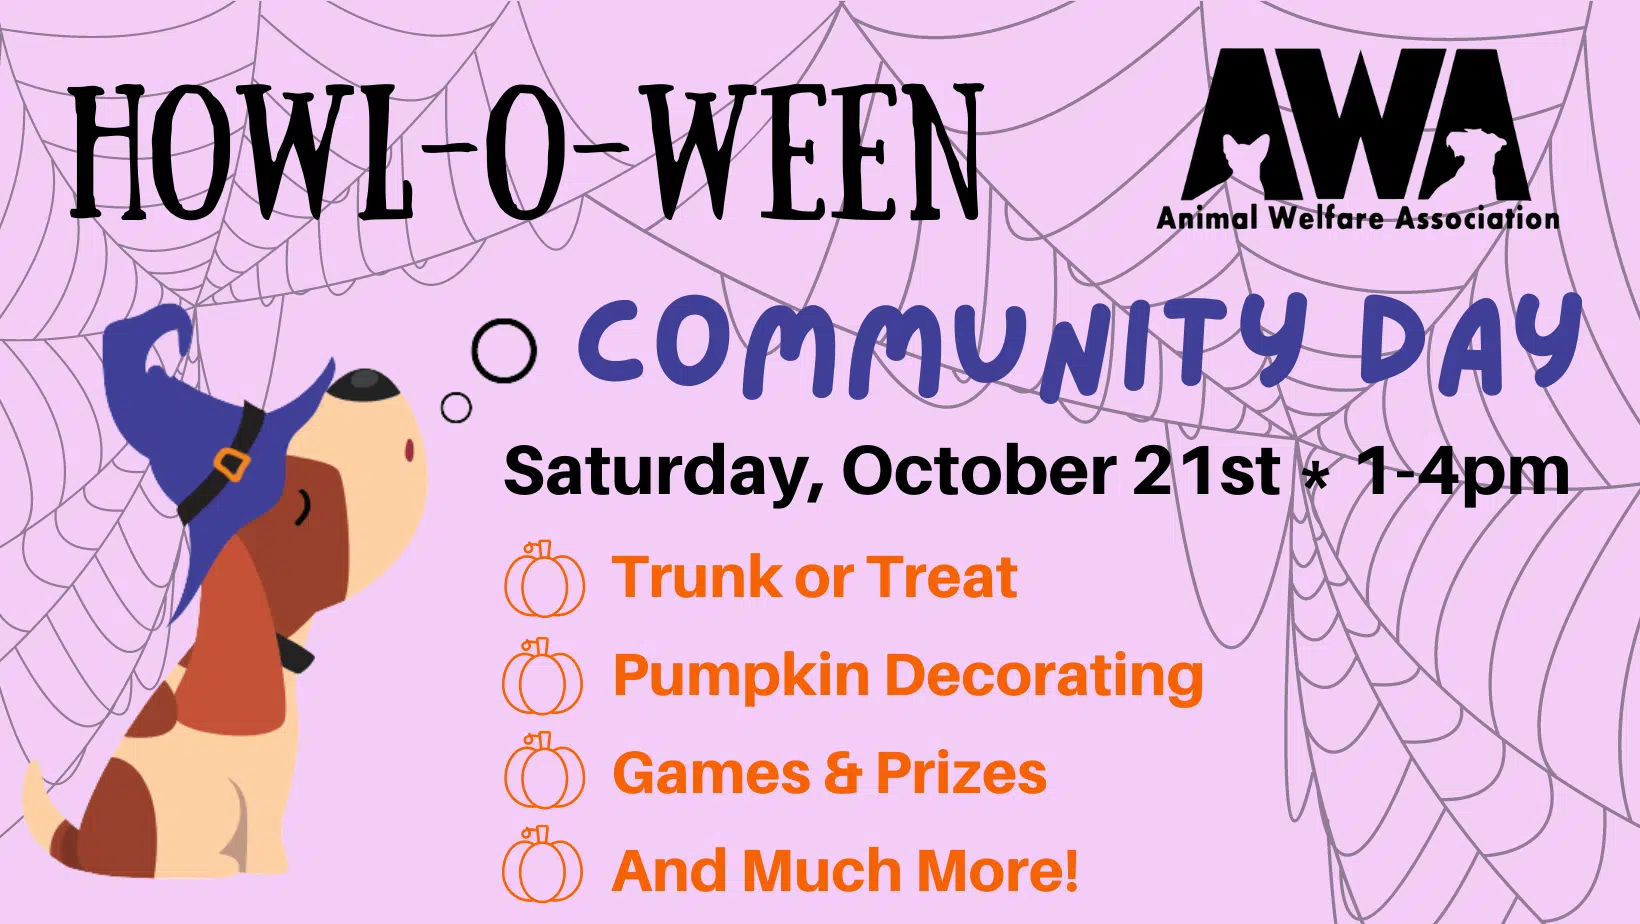 Flyer with dog in costume with details of AWA's Howl-o-Ween Community Day and Trunk or Treat.